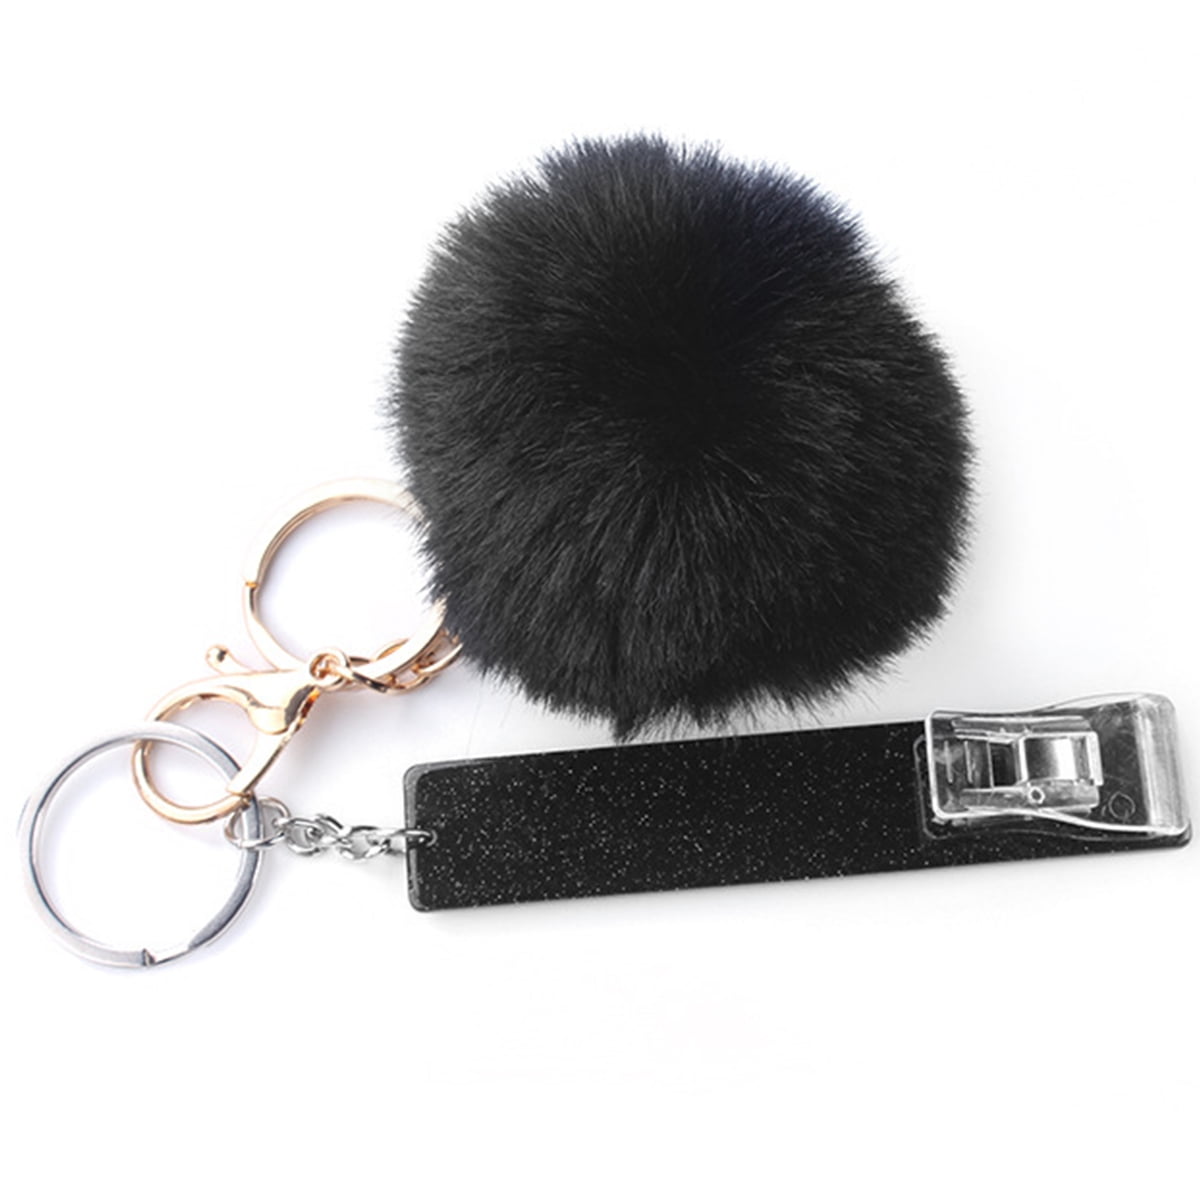 Long Nails Keychain Cards Nail Treatments Clip Key Rings Credit Card Puller  Pompom Keychains Acrylic Debit Bank Card Grabber From Fashion_show2017,  $1.64